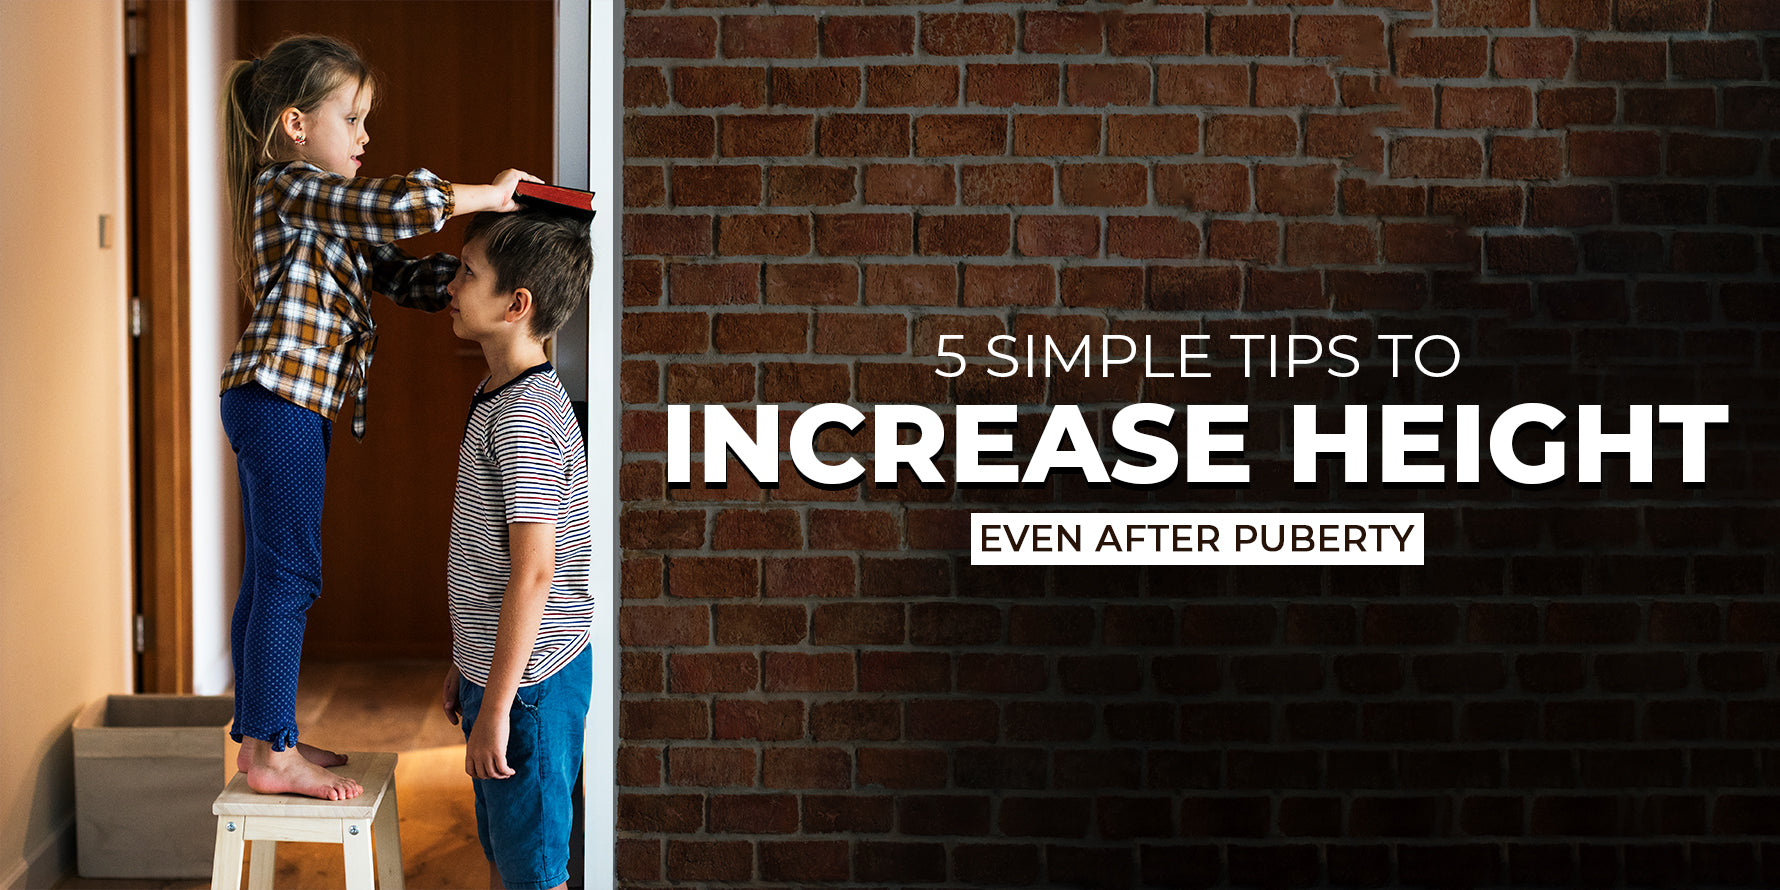 5 Simple Tips to Increase Height Even After Puberty